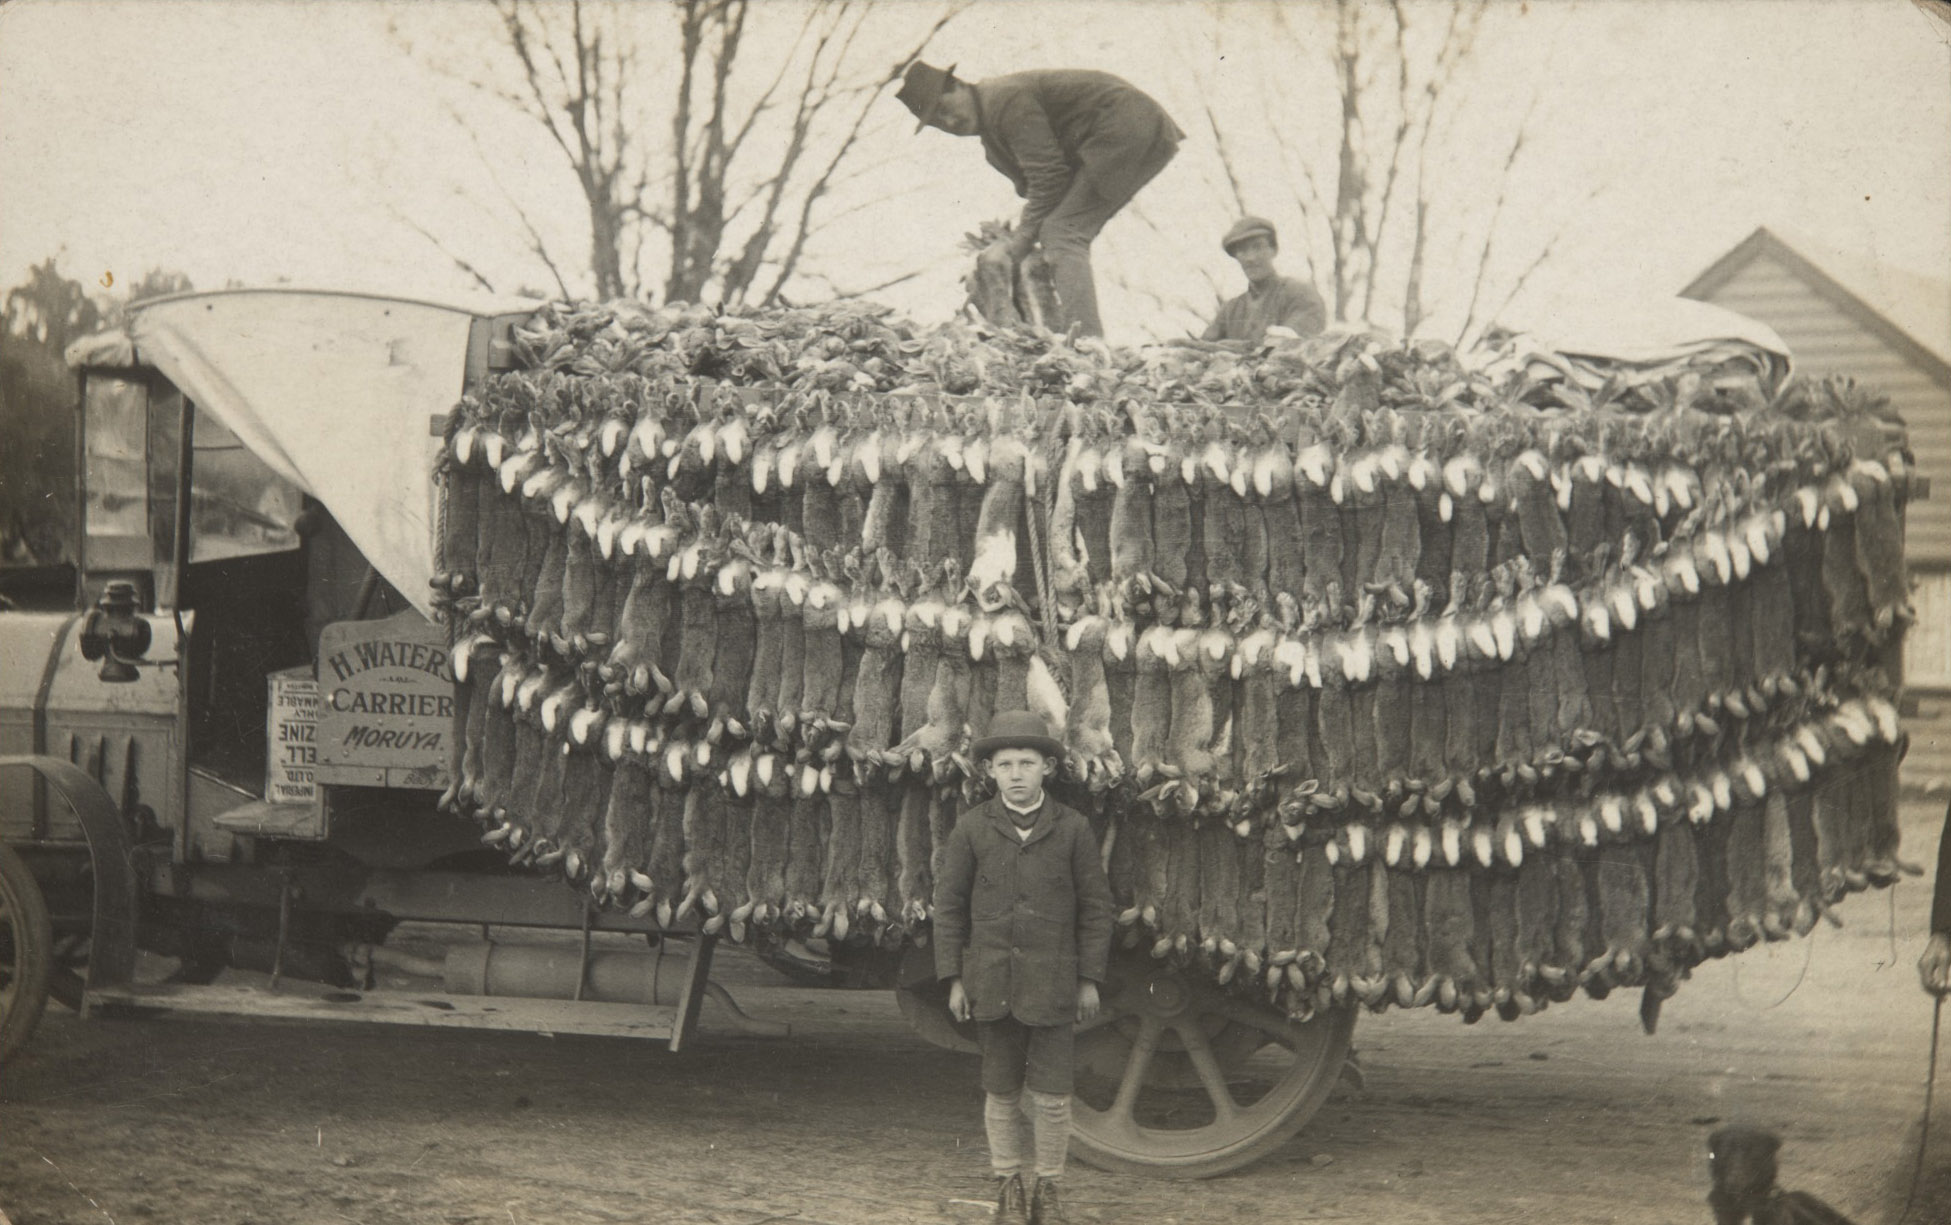 Lorry load of rabbits, Braidwood, NSW, photographed by Paul C. Nomchong
